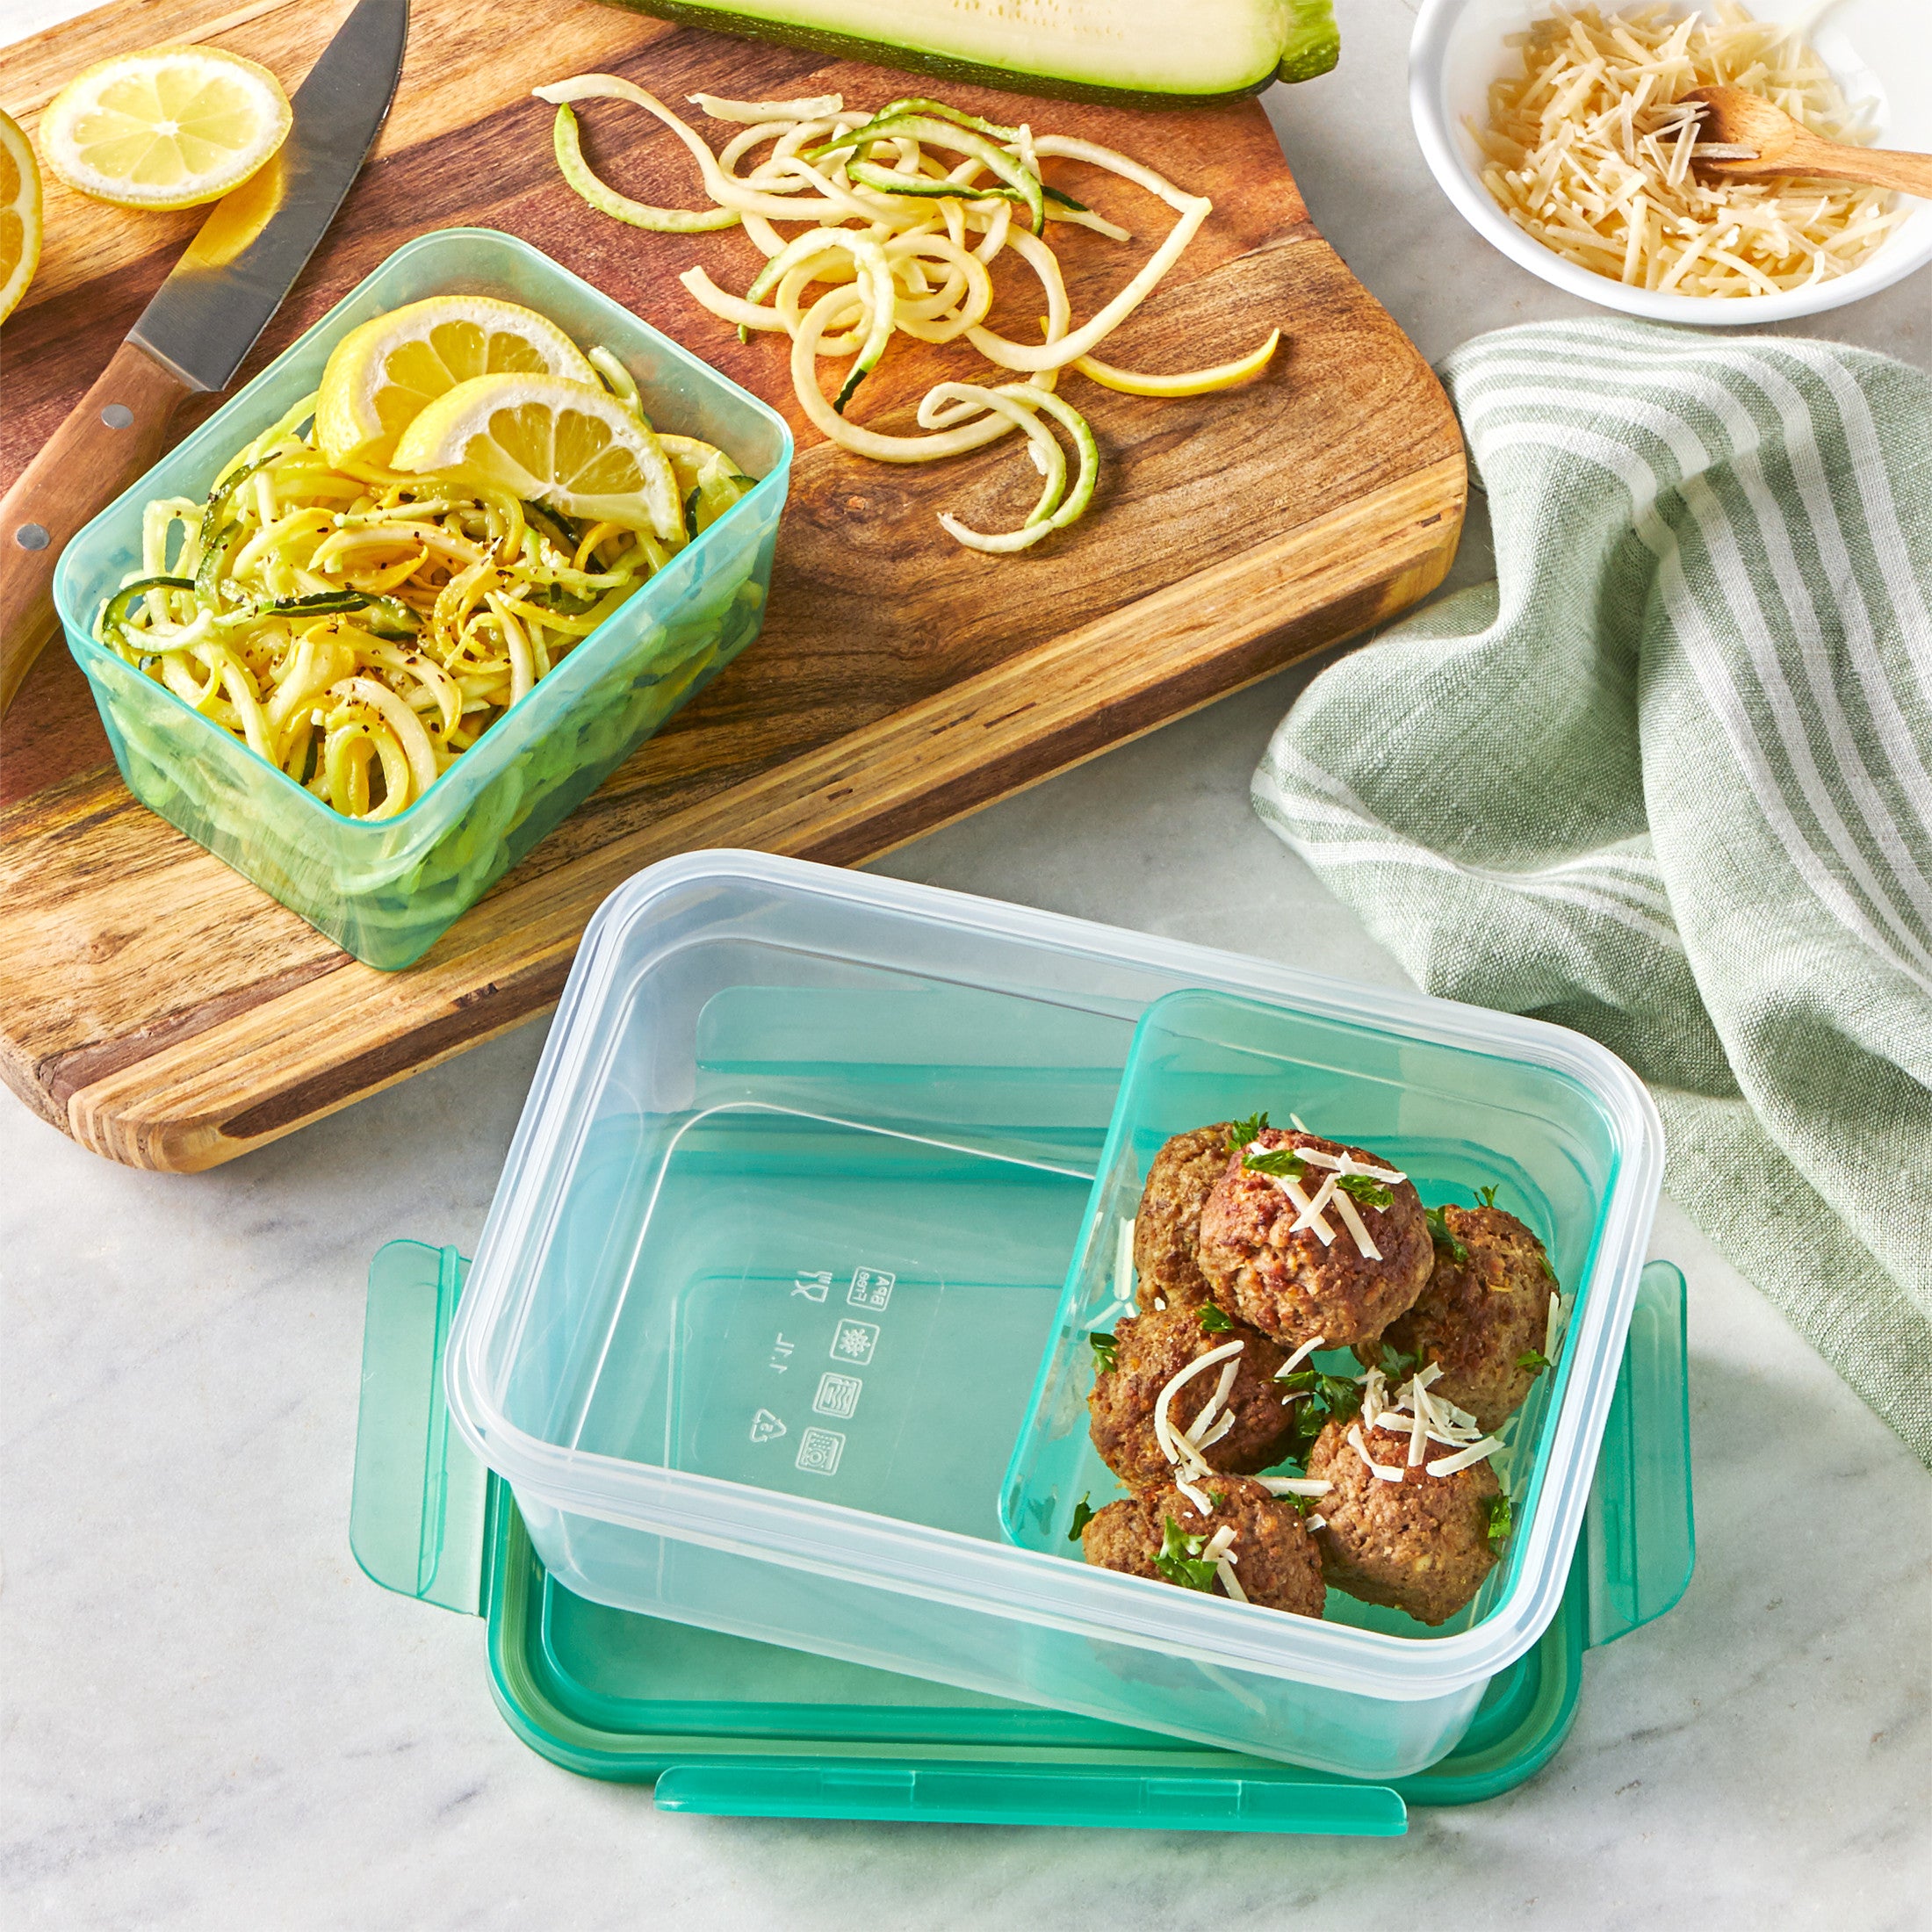 Snapware® TS Meal Prep Rectangle 4.6 Cup-2 Trays